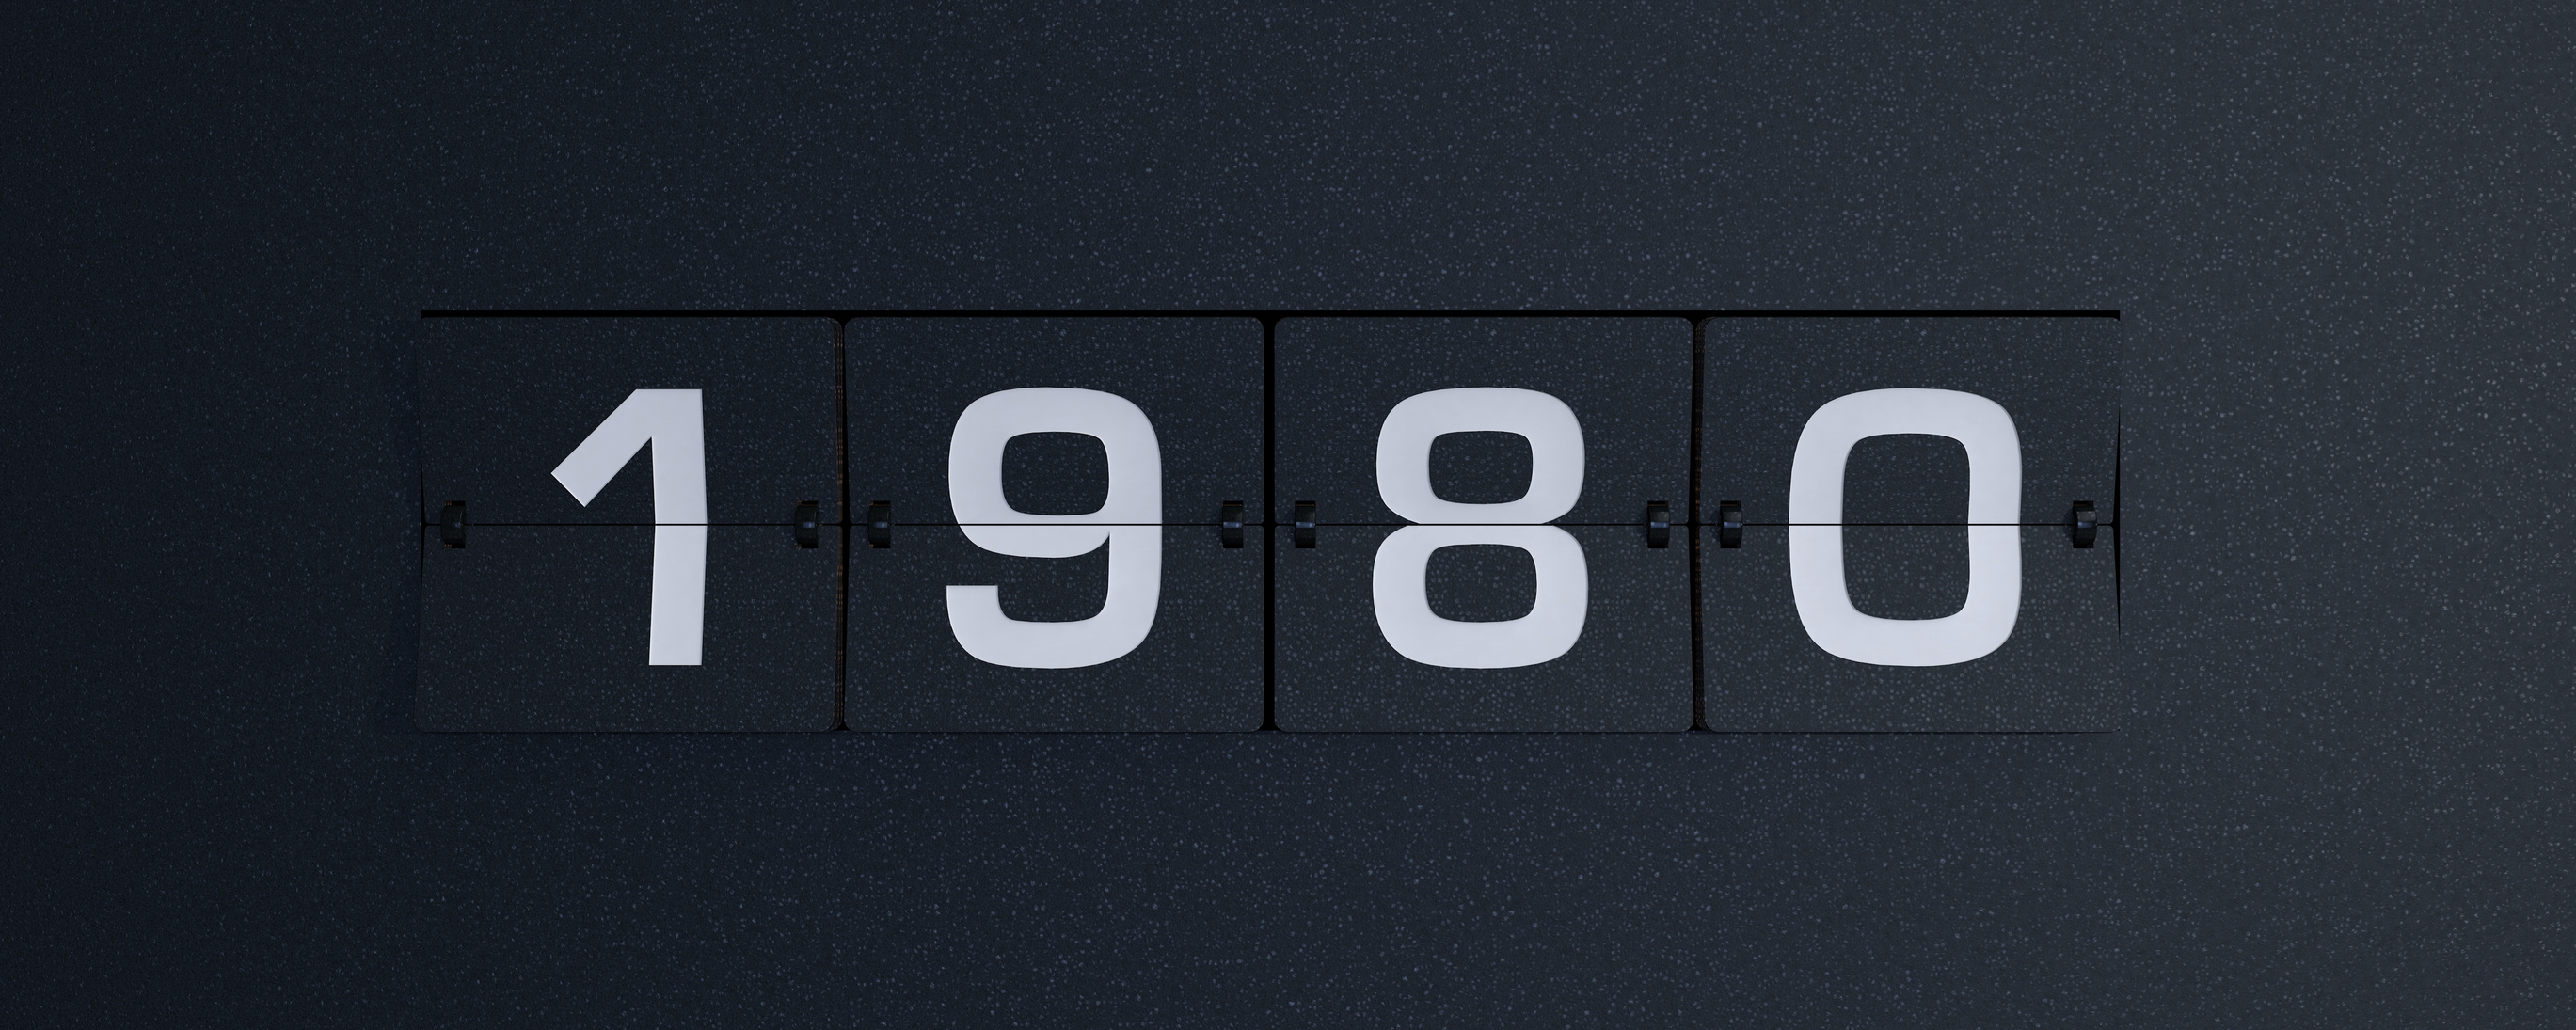 Flip clock-style numbers showing the year 1980